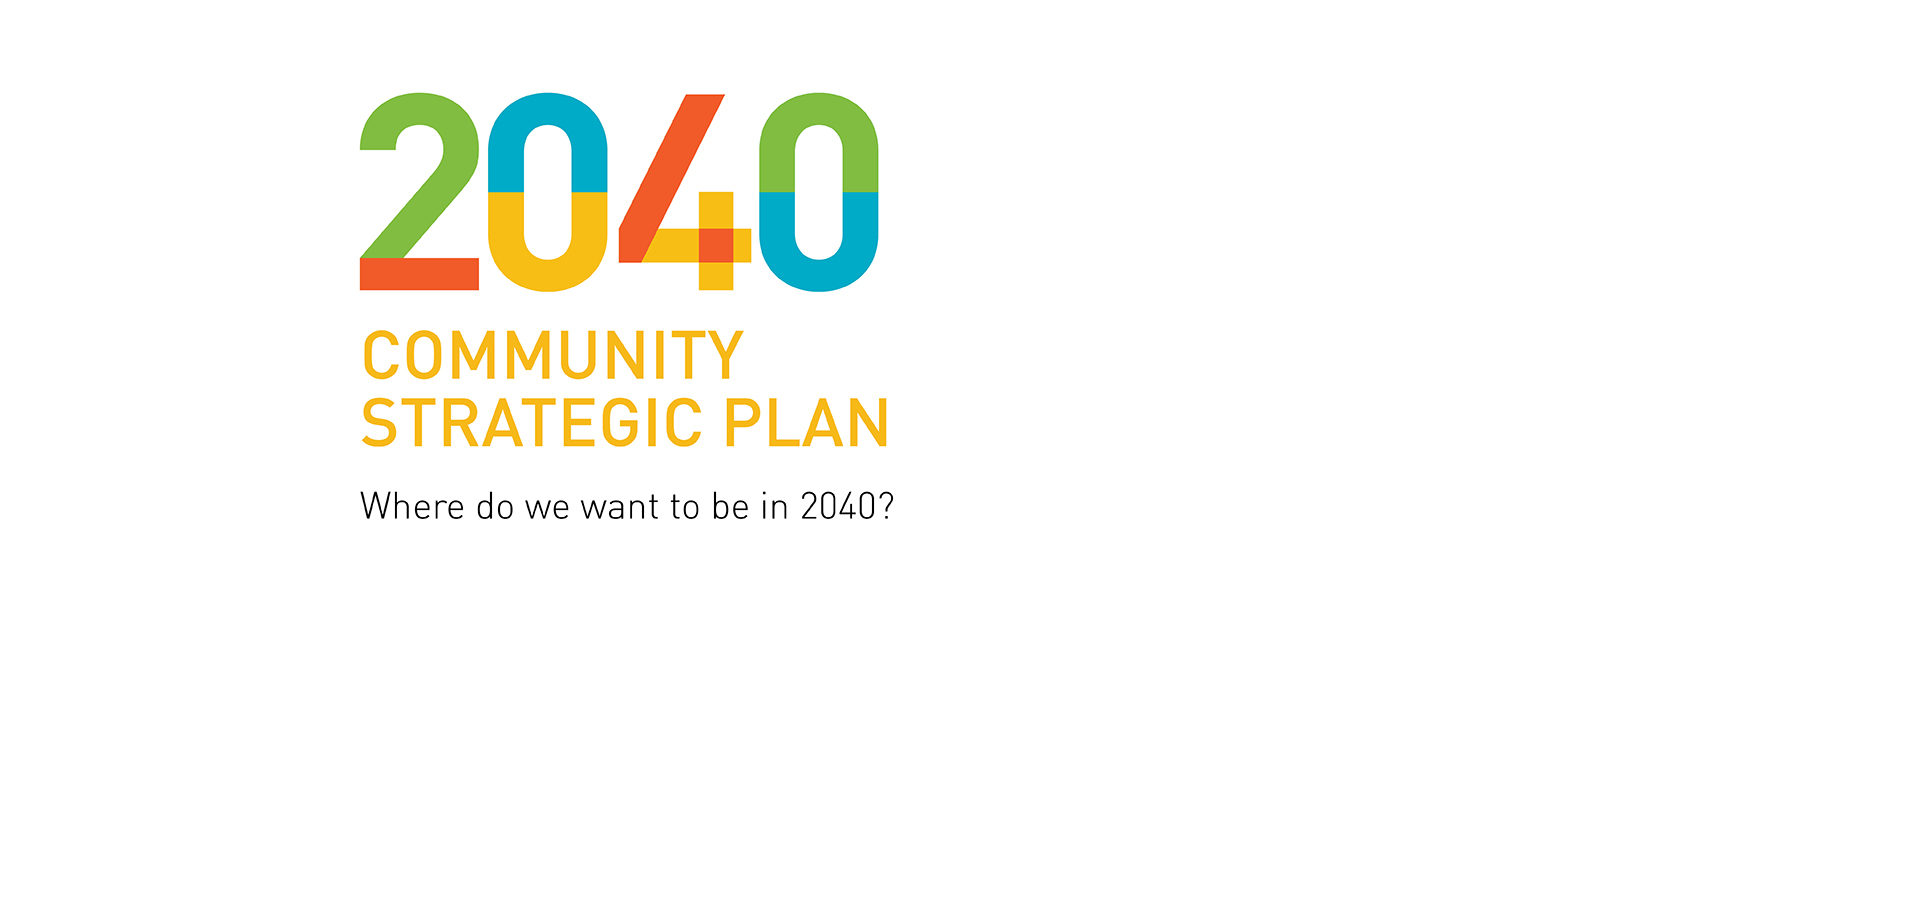 View our 2040 Community Strategic Plan